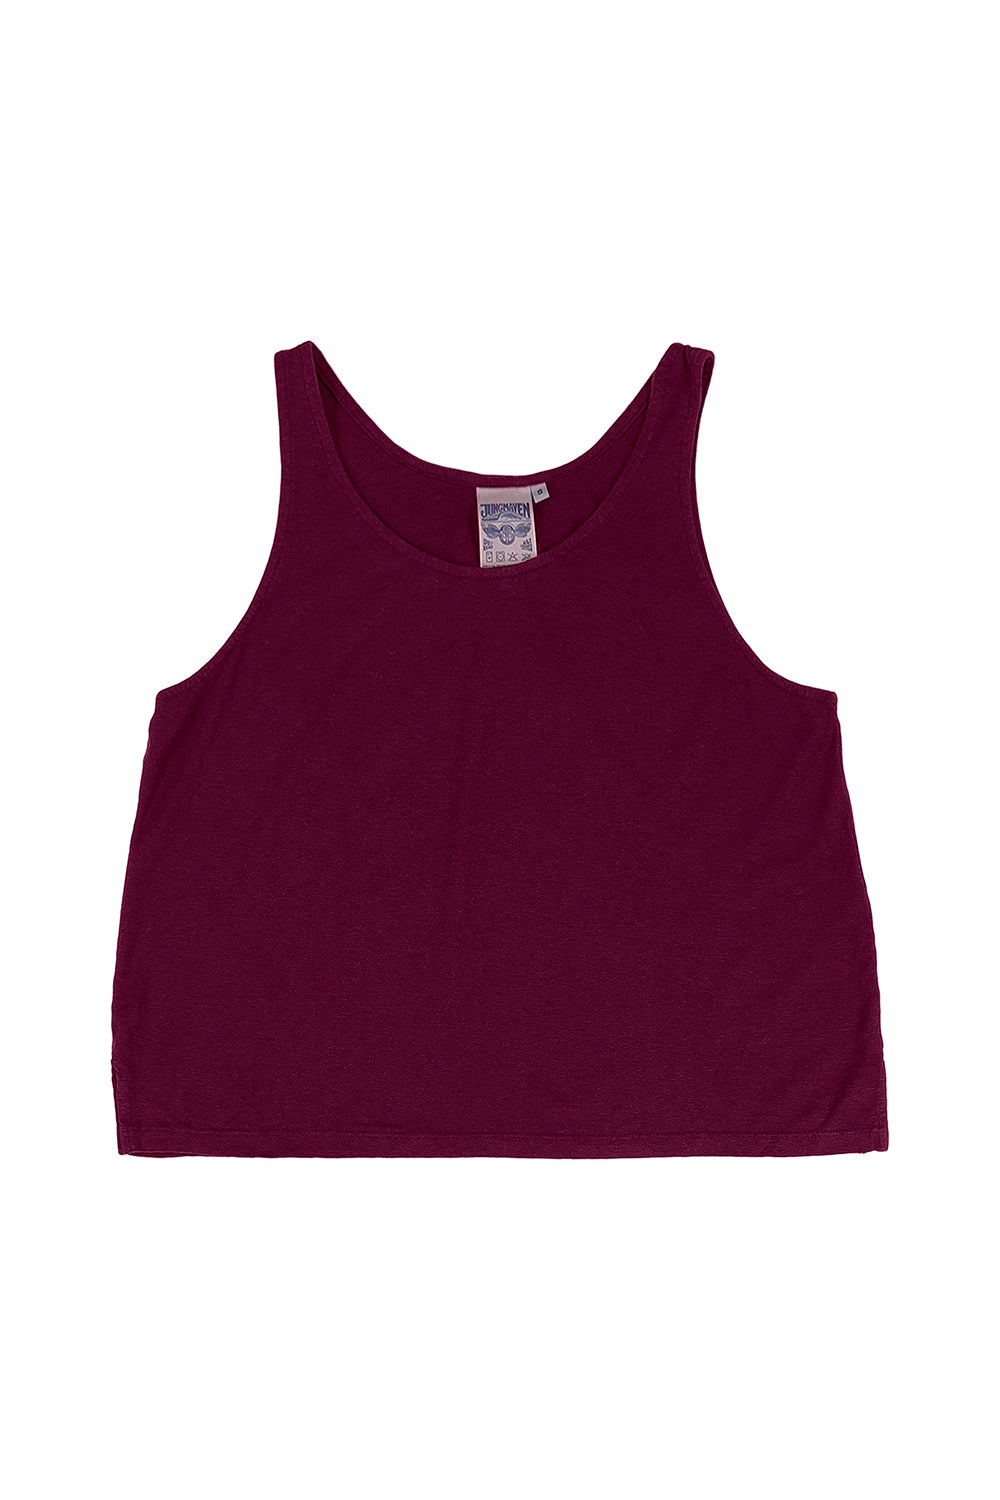 Cropped Tank | Jungmaven Hemp Clothing & Accessories / Color: Burgundy